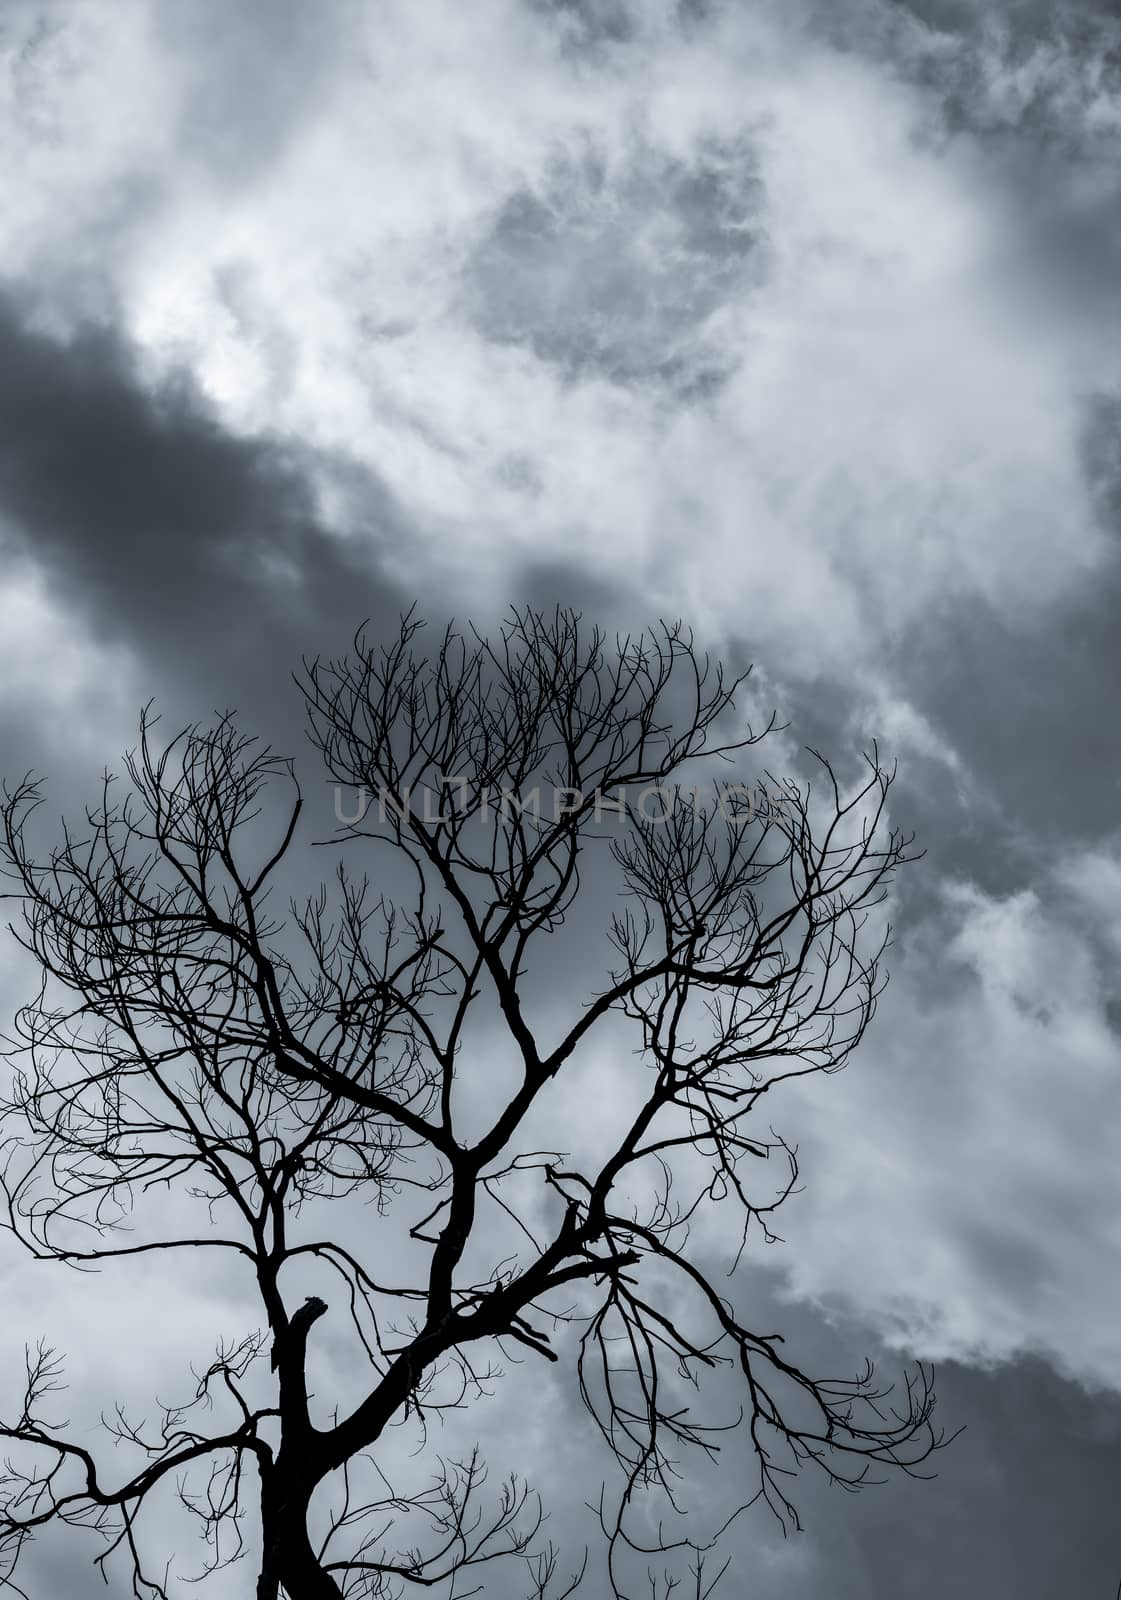 Silhouette dead tree and branch on grey sky background. Black br by Fahroni